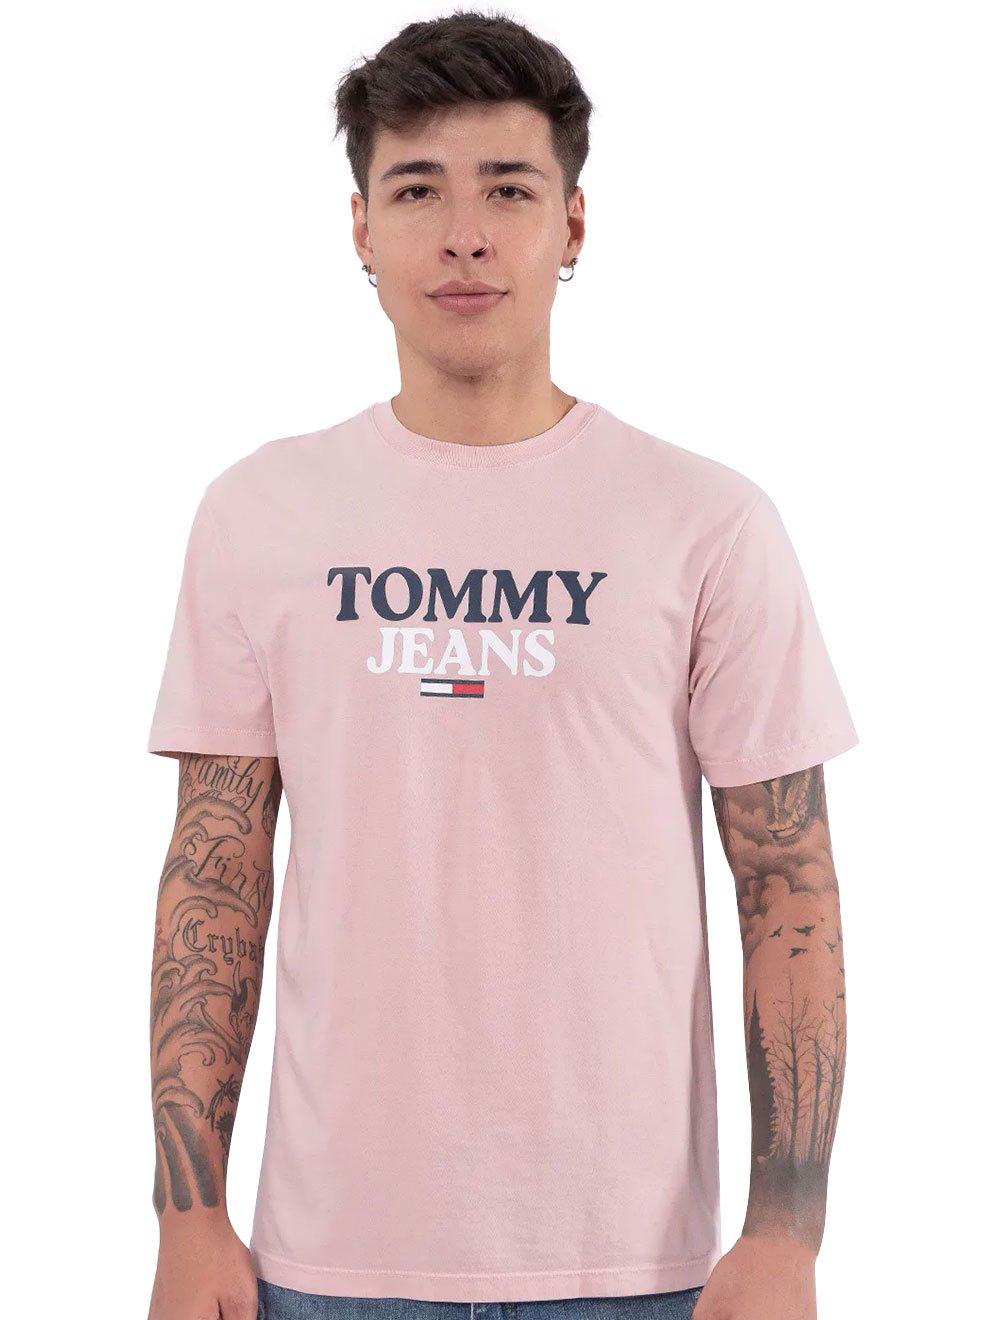 Camiseta Tommy Jeans Masculina Center Entry Graphic Rosa Claro